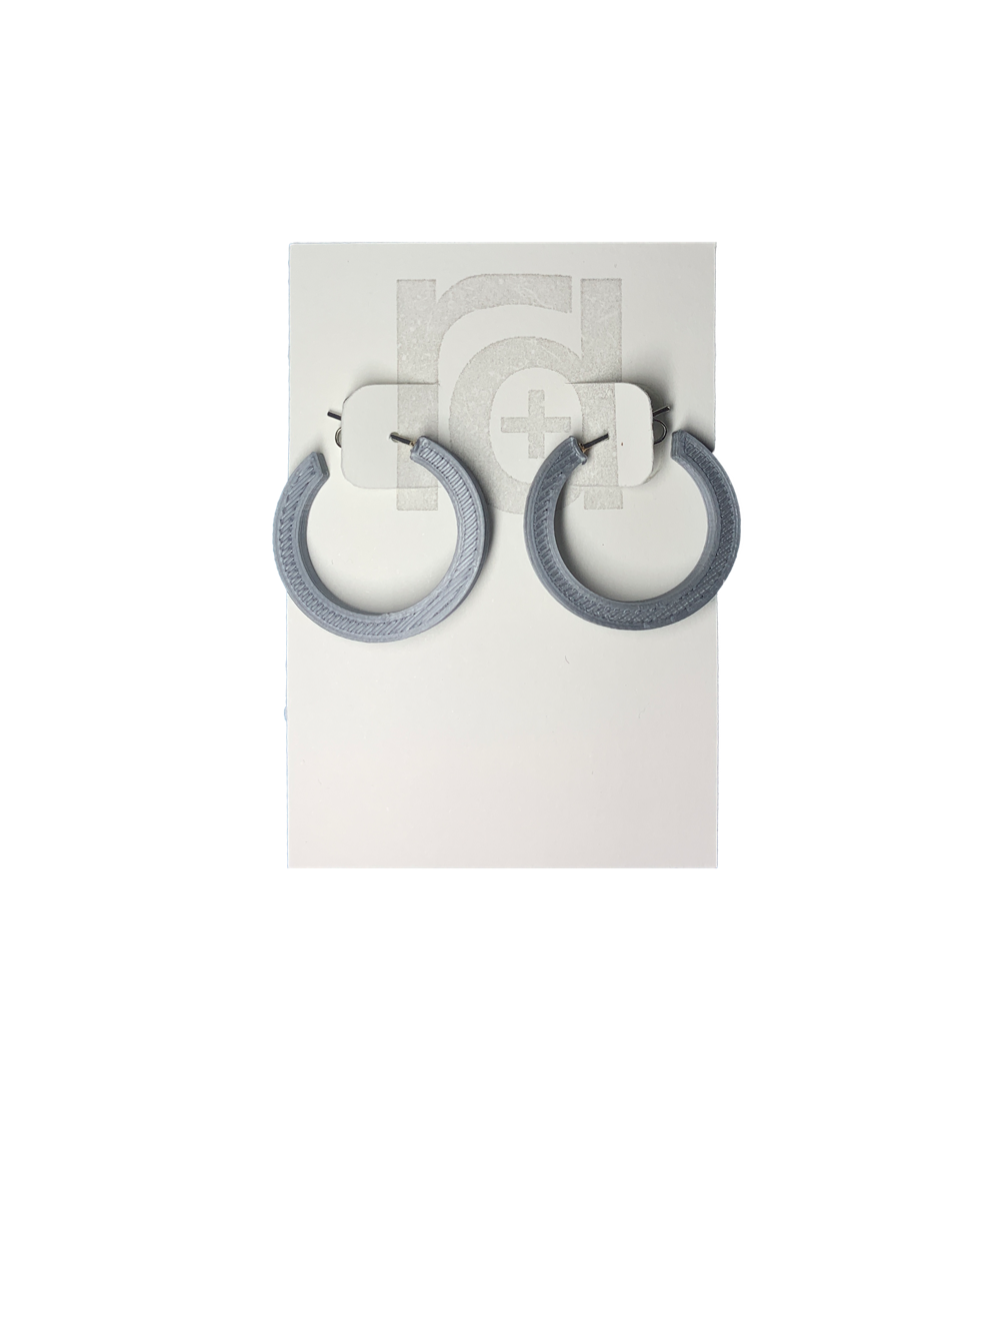 On a white R+D earring card are two chunky hoops. They are printed in an eco friendly silver color.